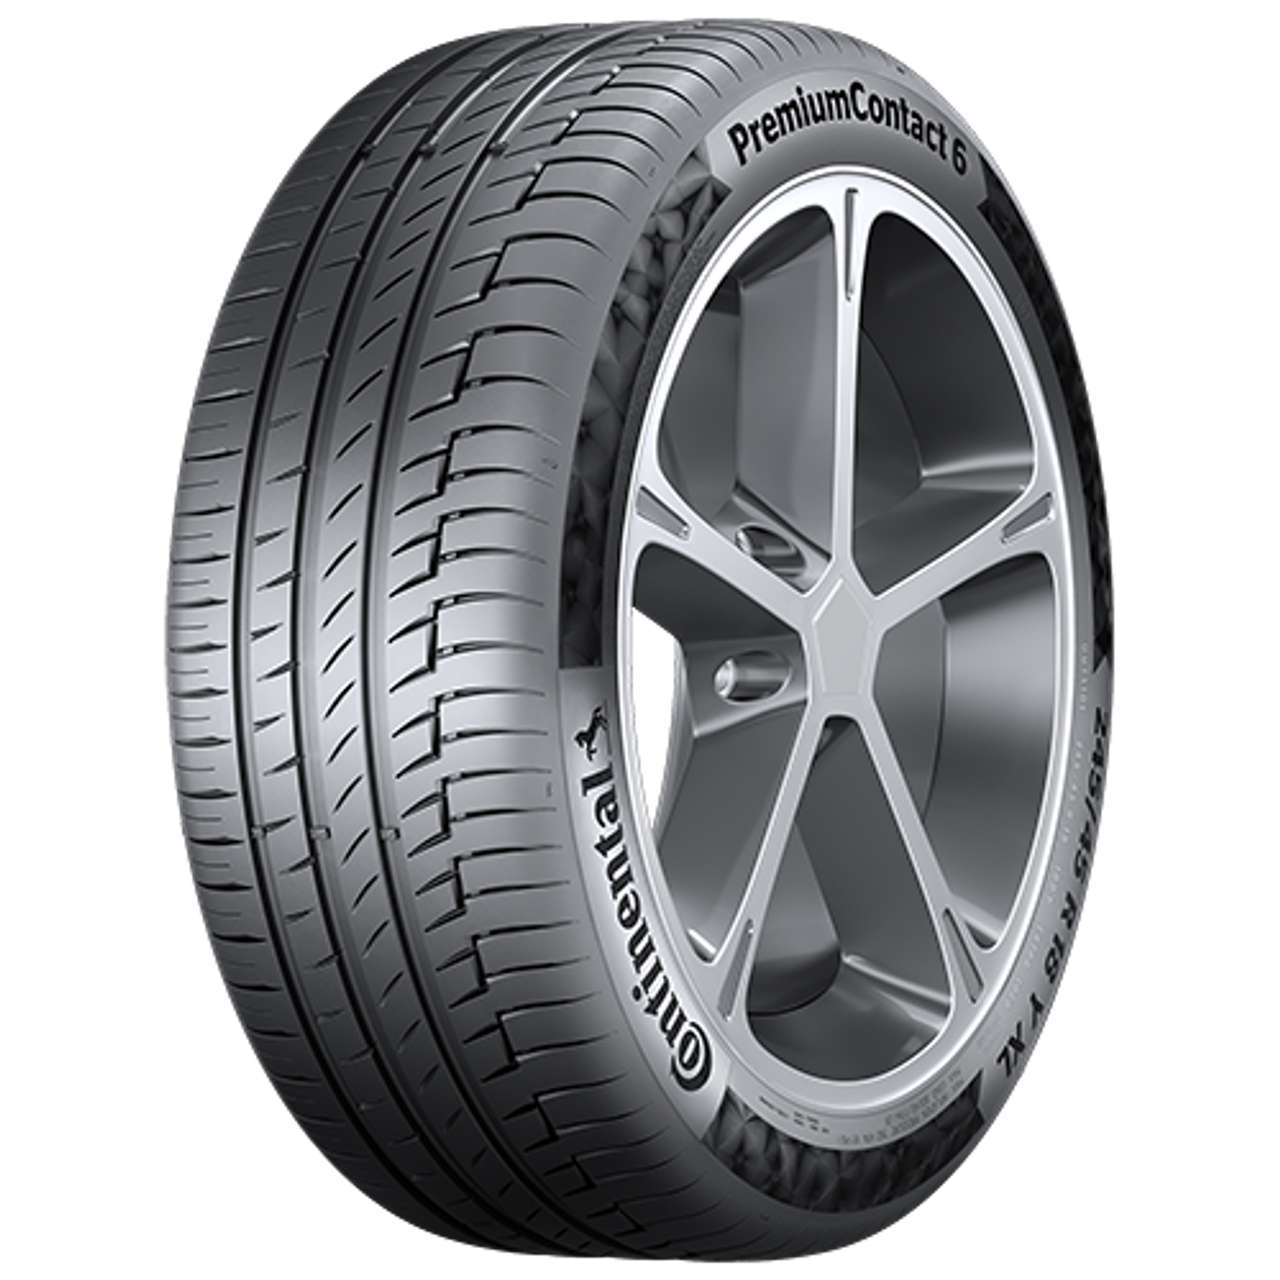 CONTINENTAL PREMIUMCONTACT 6 (EVc) 275/45R21 107V FR BSW